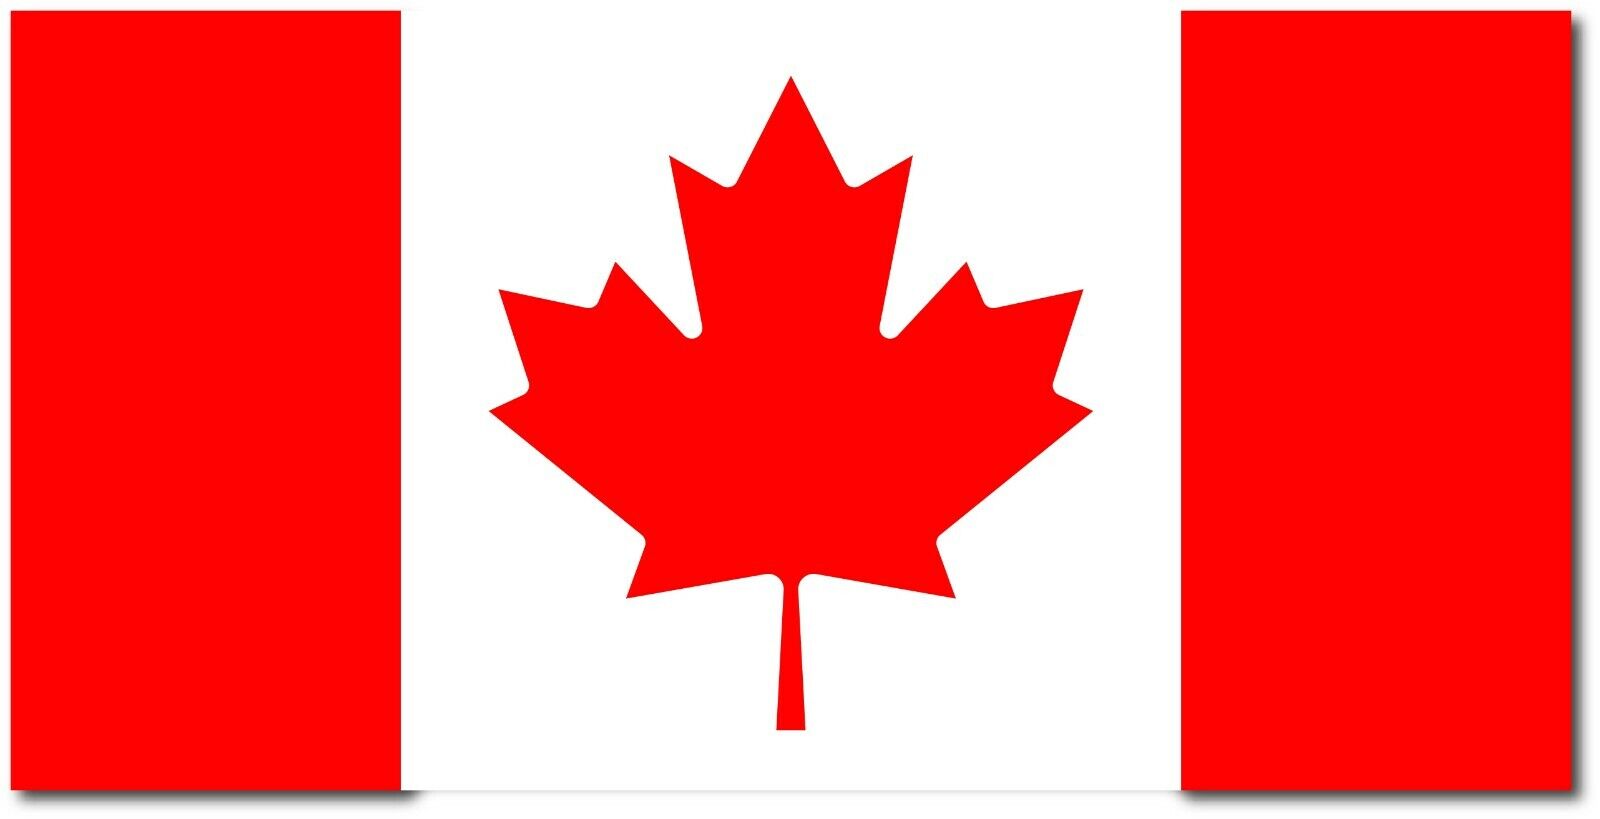 CANADA CANADIAN FLAG DECAL 3M STICKER Various SIZES CAR TRUCK WINDOW USA MADE